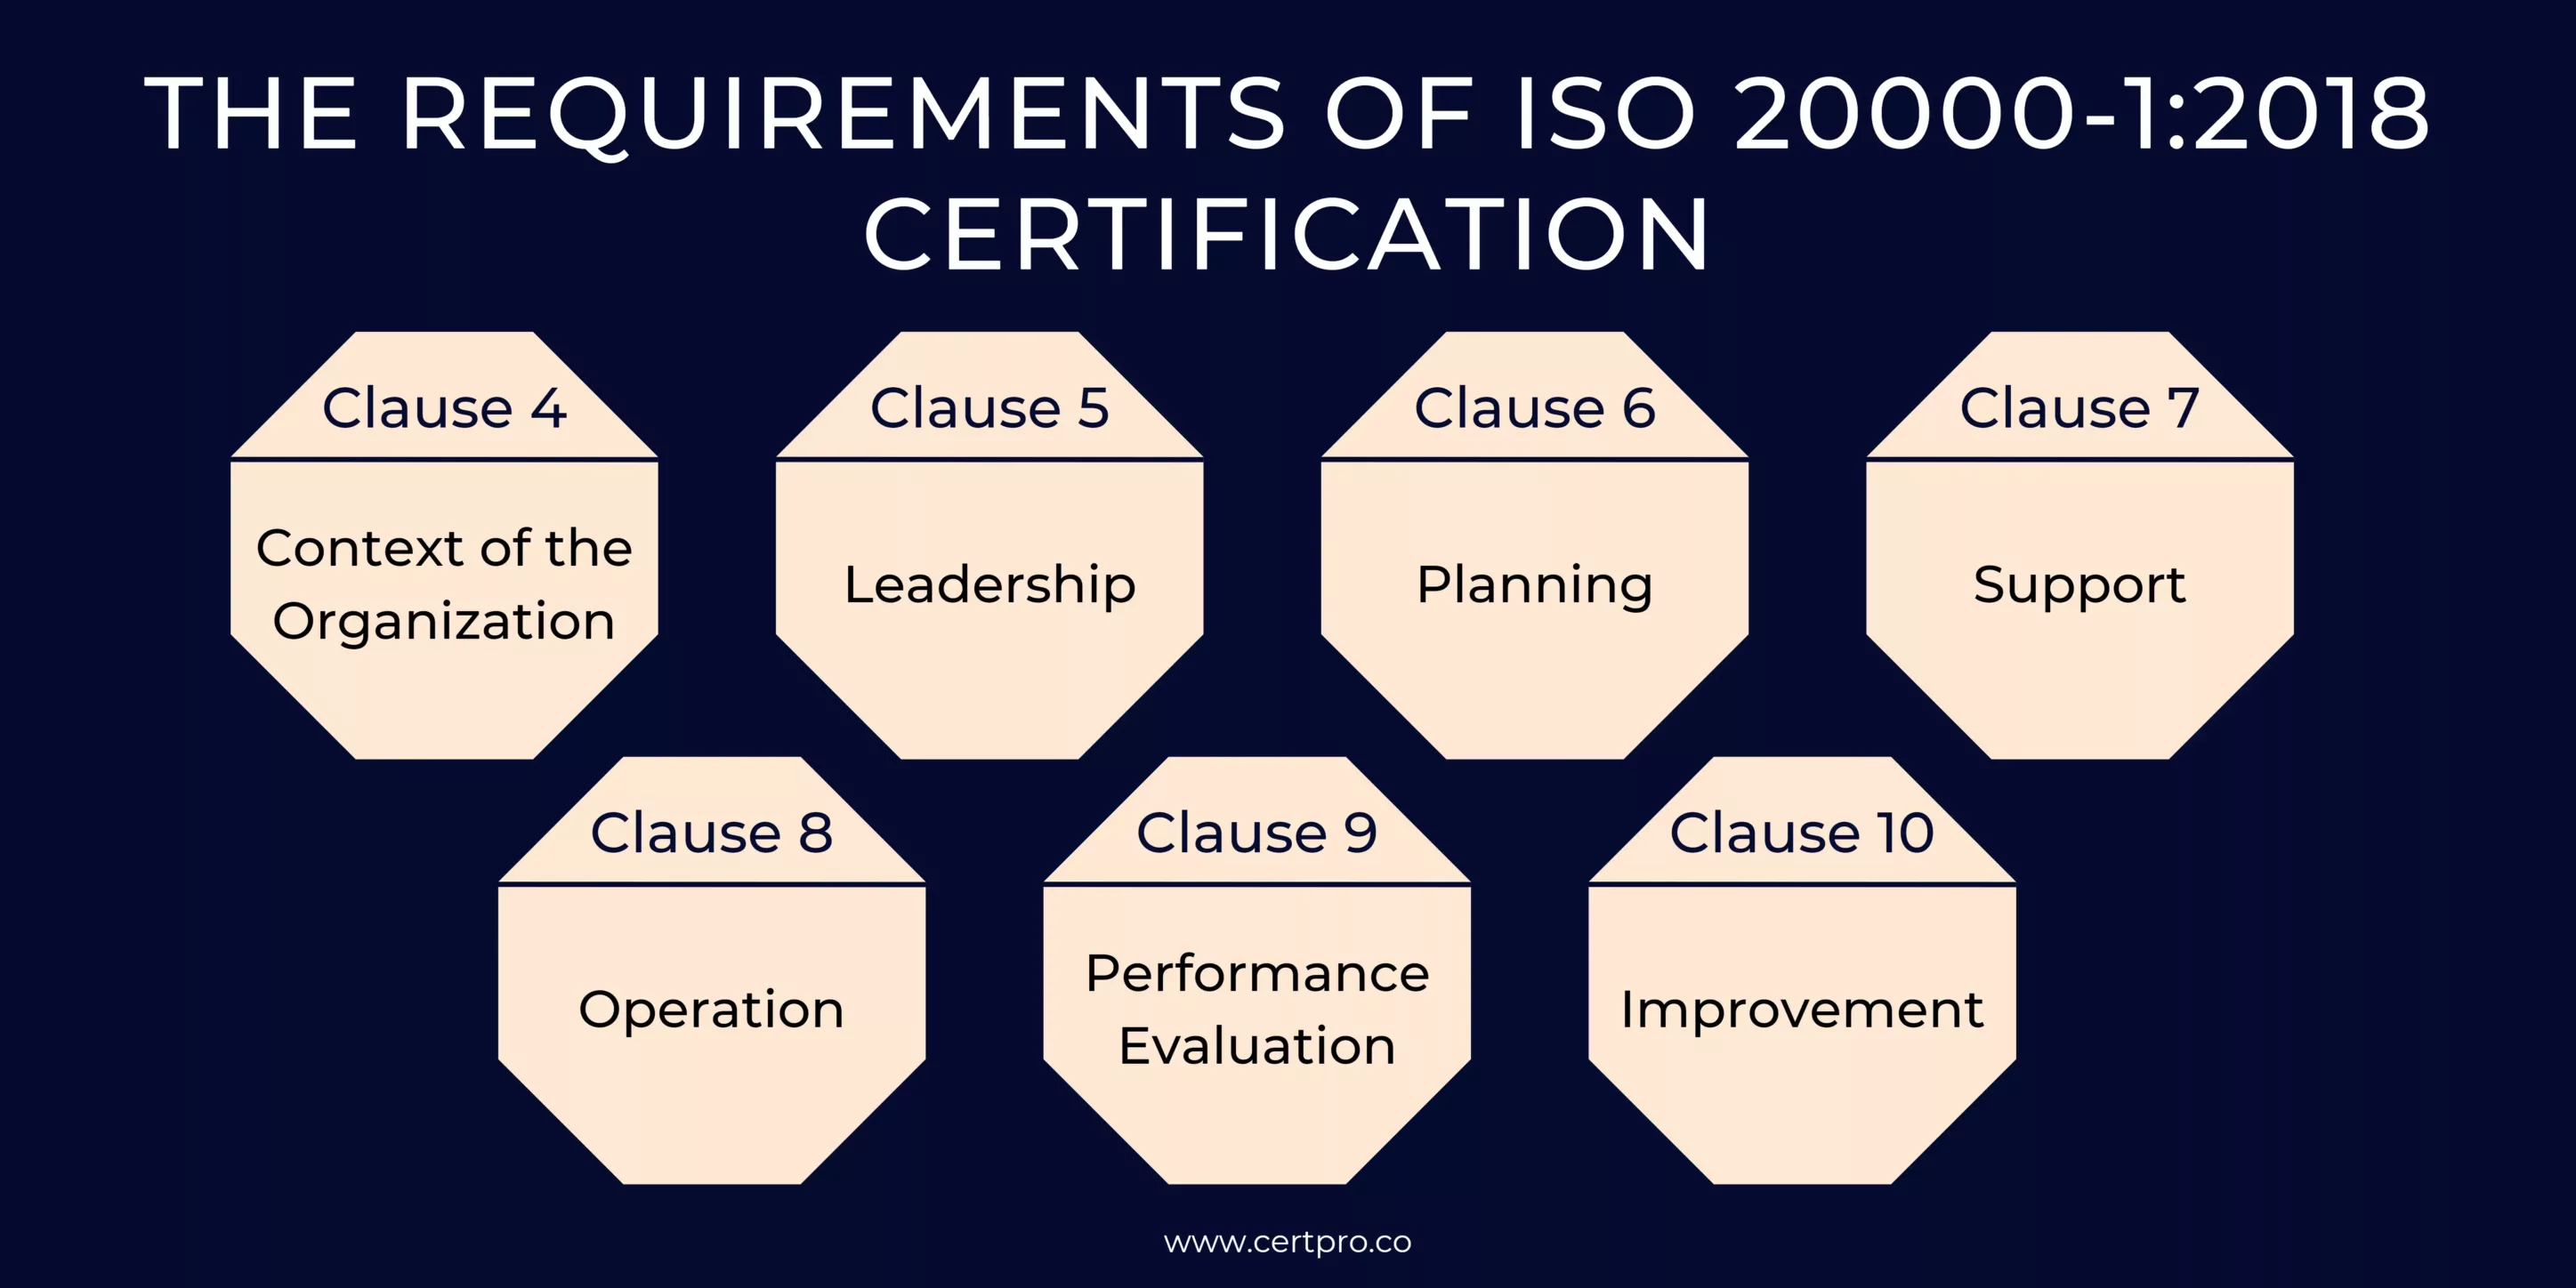 REQUIREMENTS OF ISO 20000-1-2018